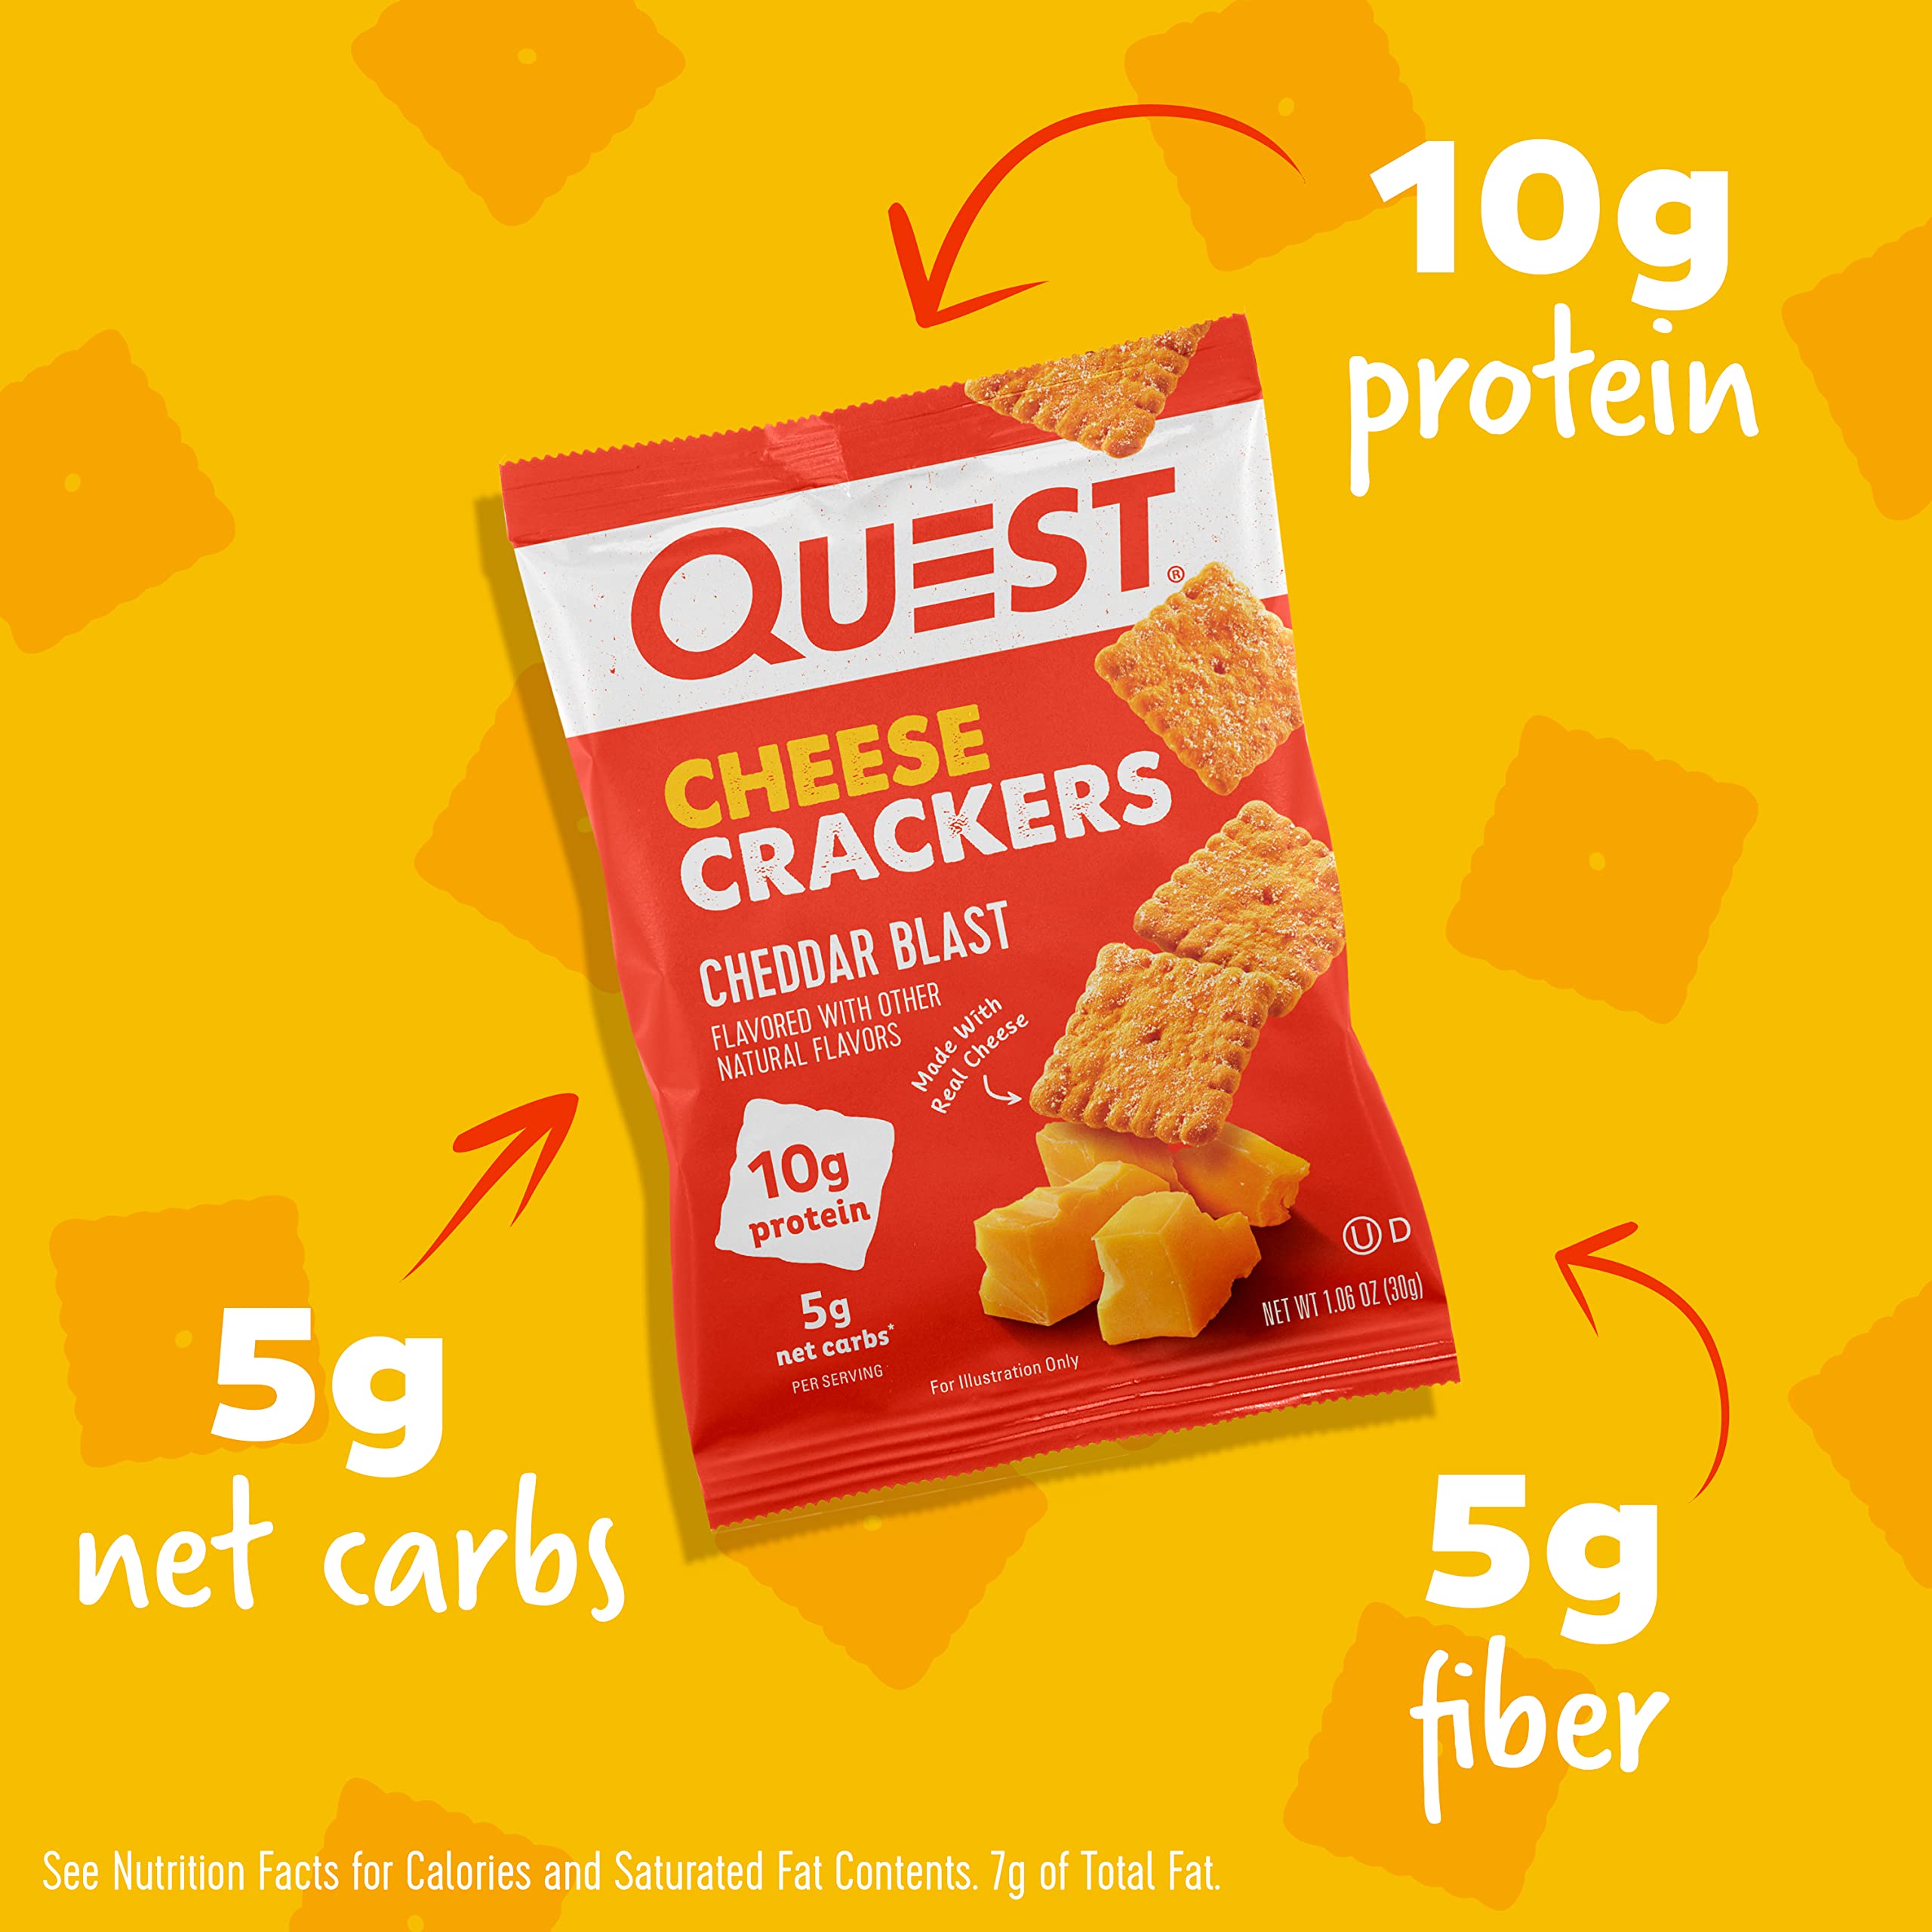 Quest Nutrition Cheese Crackers & Protein Chips Variety Pack, (BBQ, Cheddar & Sour Cream, Sour Cream & Onion), High Protein, Low Carb, 1.1 Ounce (Pack of 12)